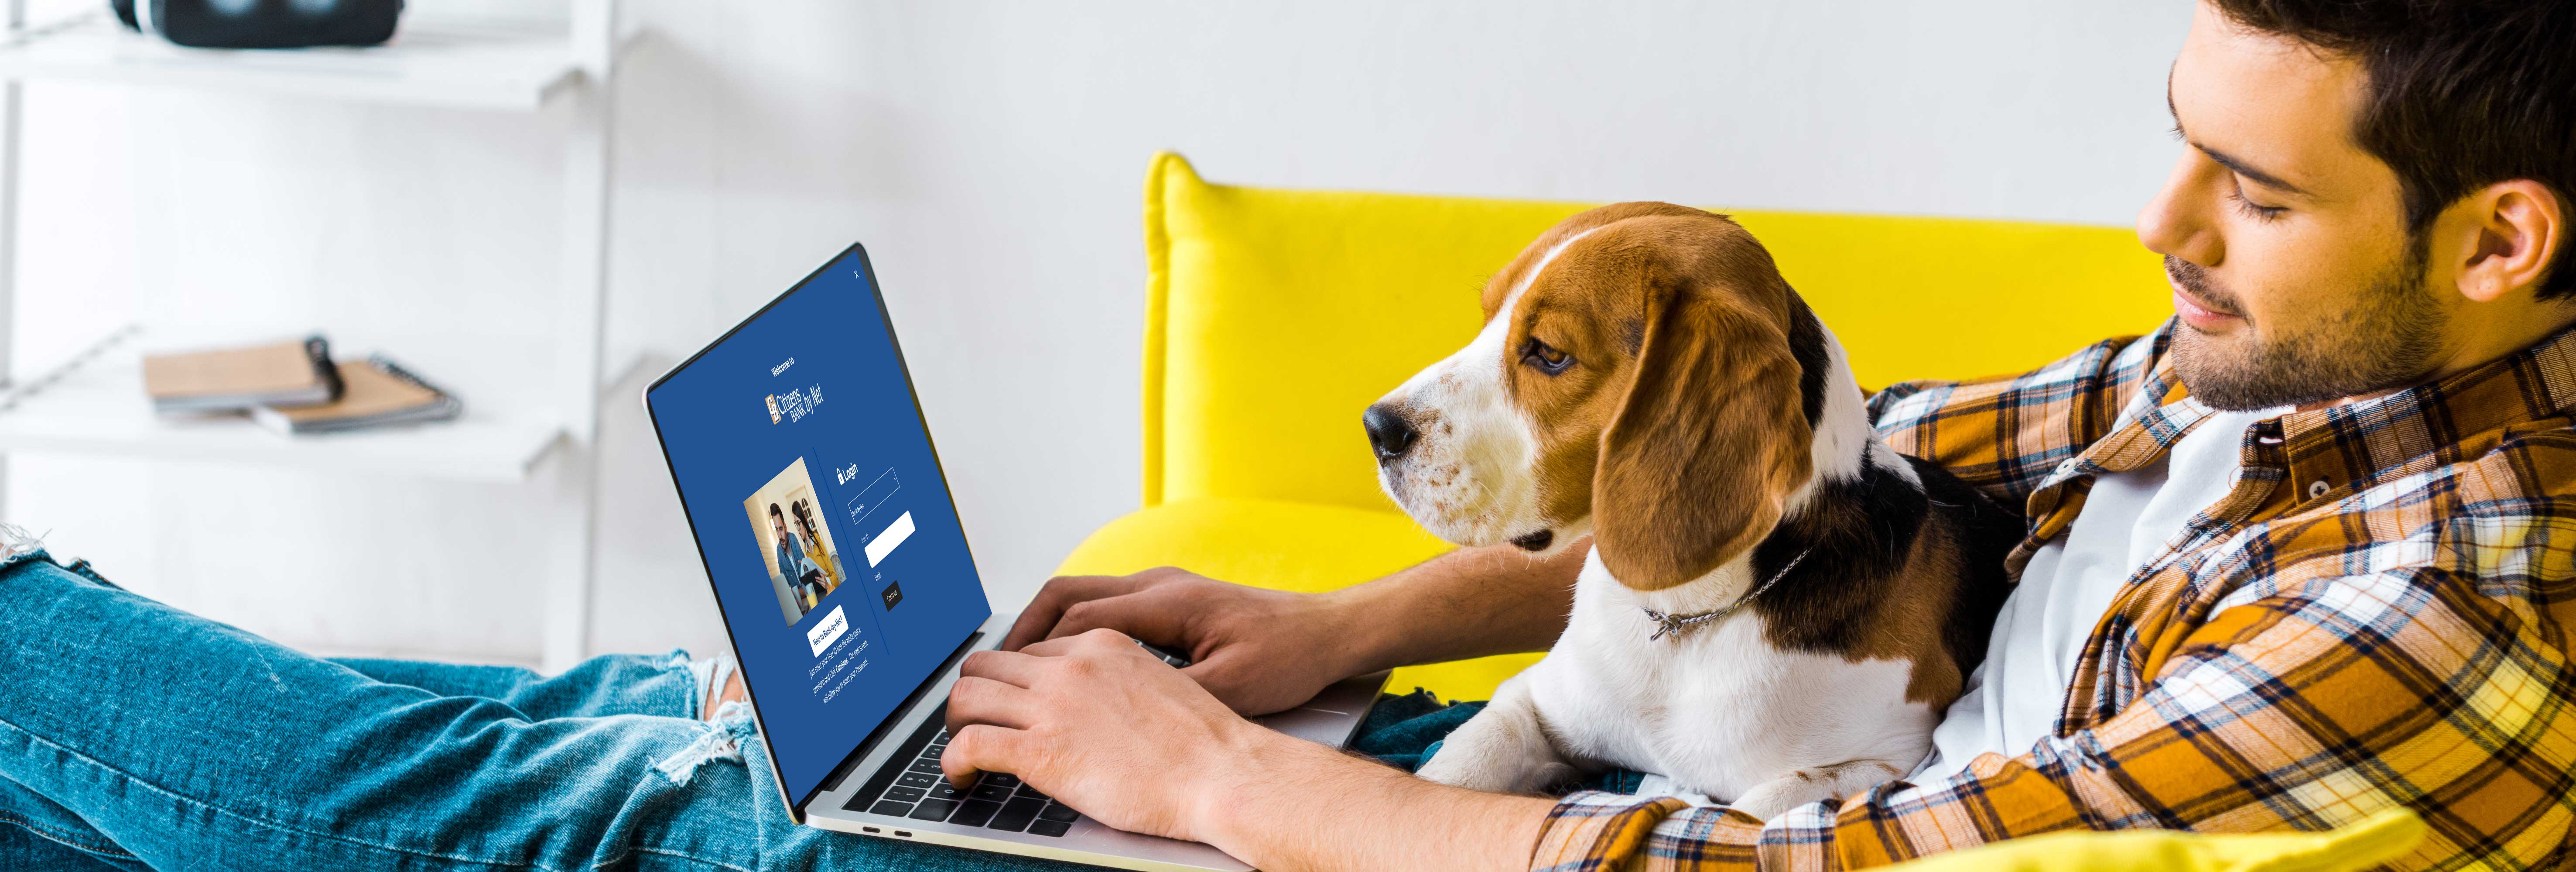 man using online banking with dog in lap